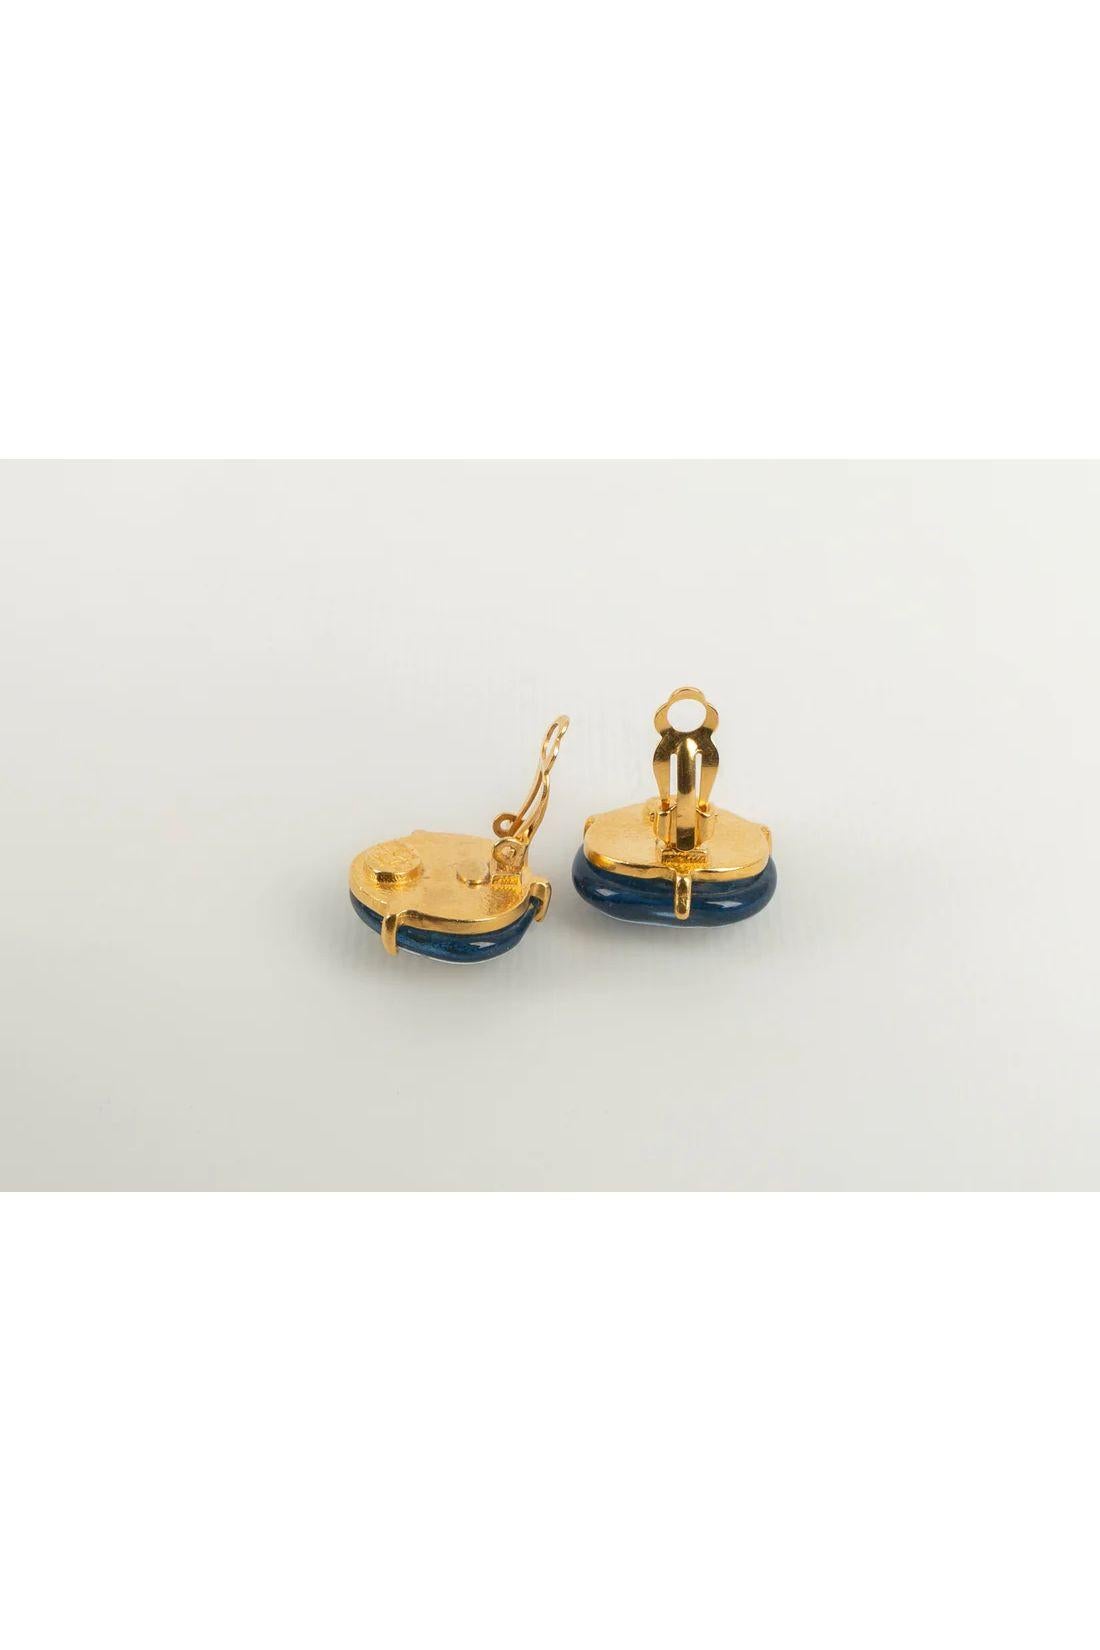 Chanel Earrings Clips in Gilded Metal and Cabochons in Blue Glass Paste In Good Condition For Sale In SAINT-OUEN-SUR-SEINE, FR